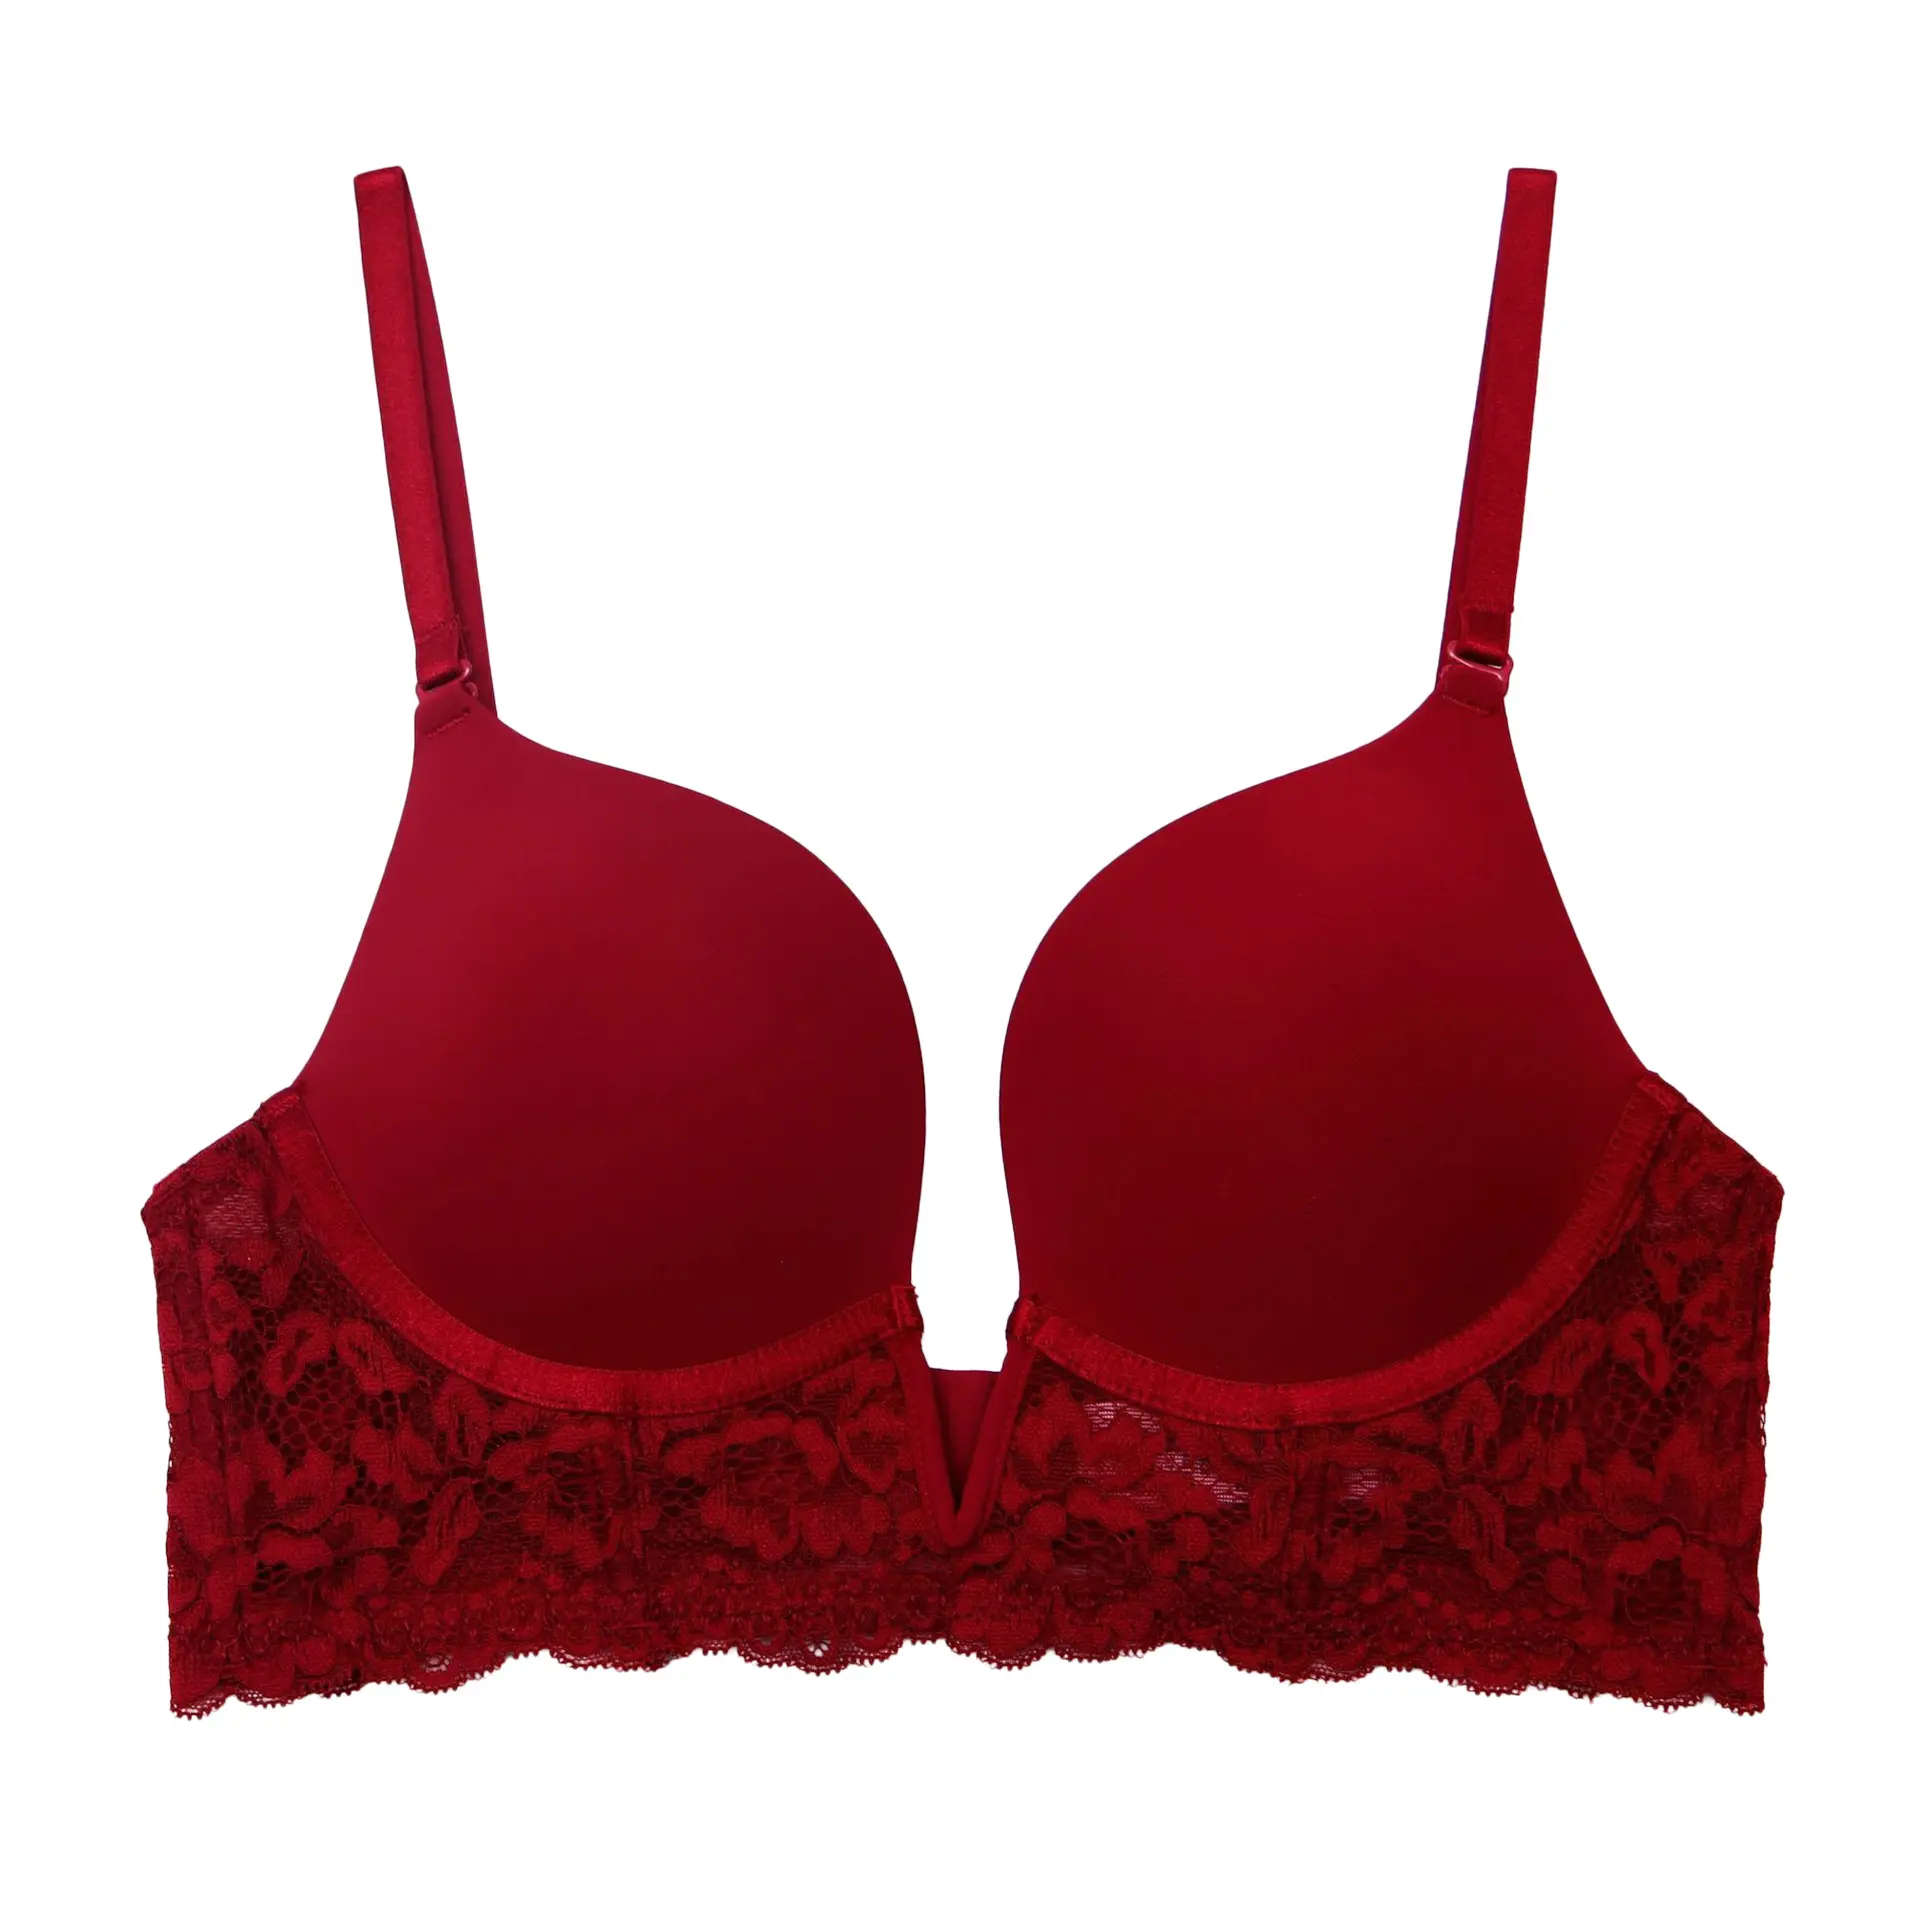 Low moq customized factory price Ready stock thin beautiful back small breast push up breasts sexy lace bra with large back